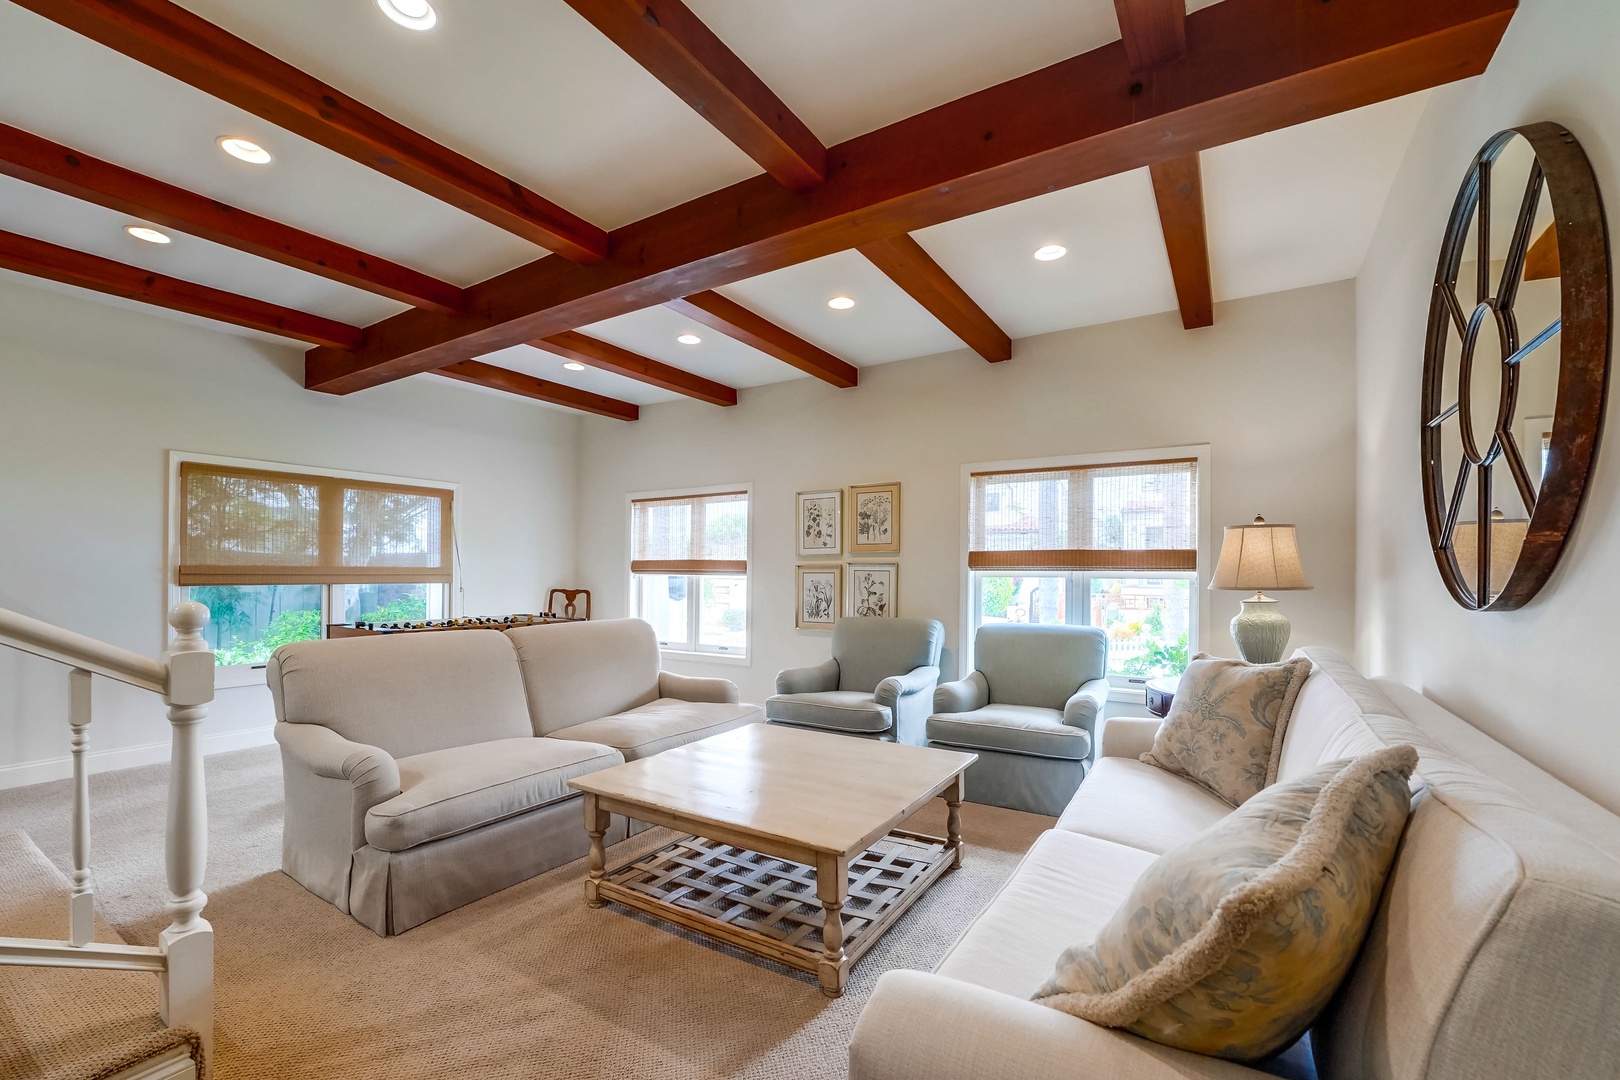 Open beam ceilings throughout